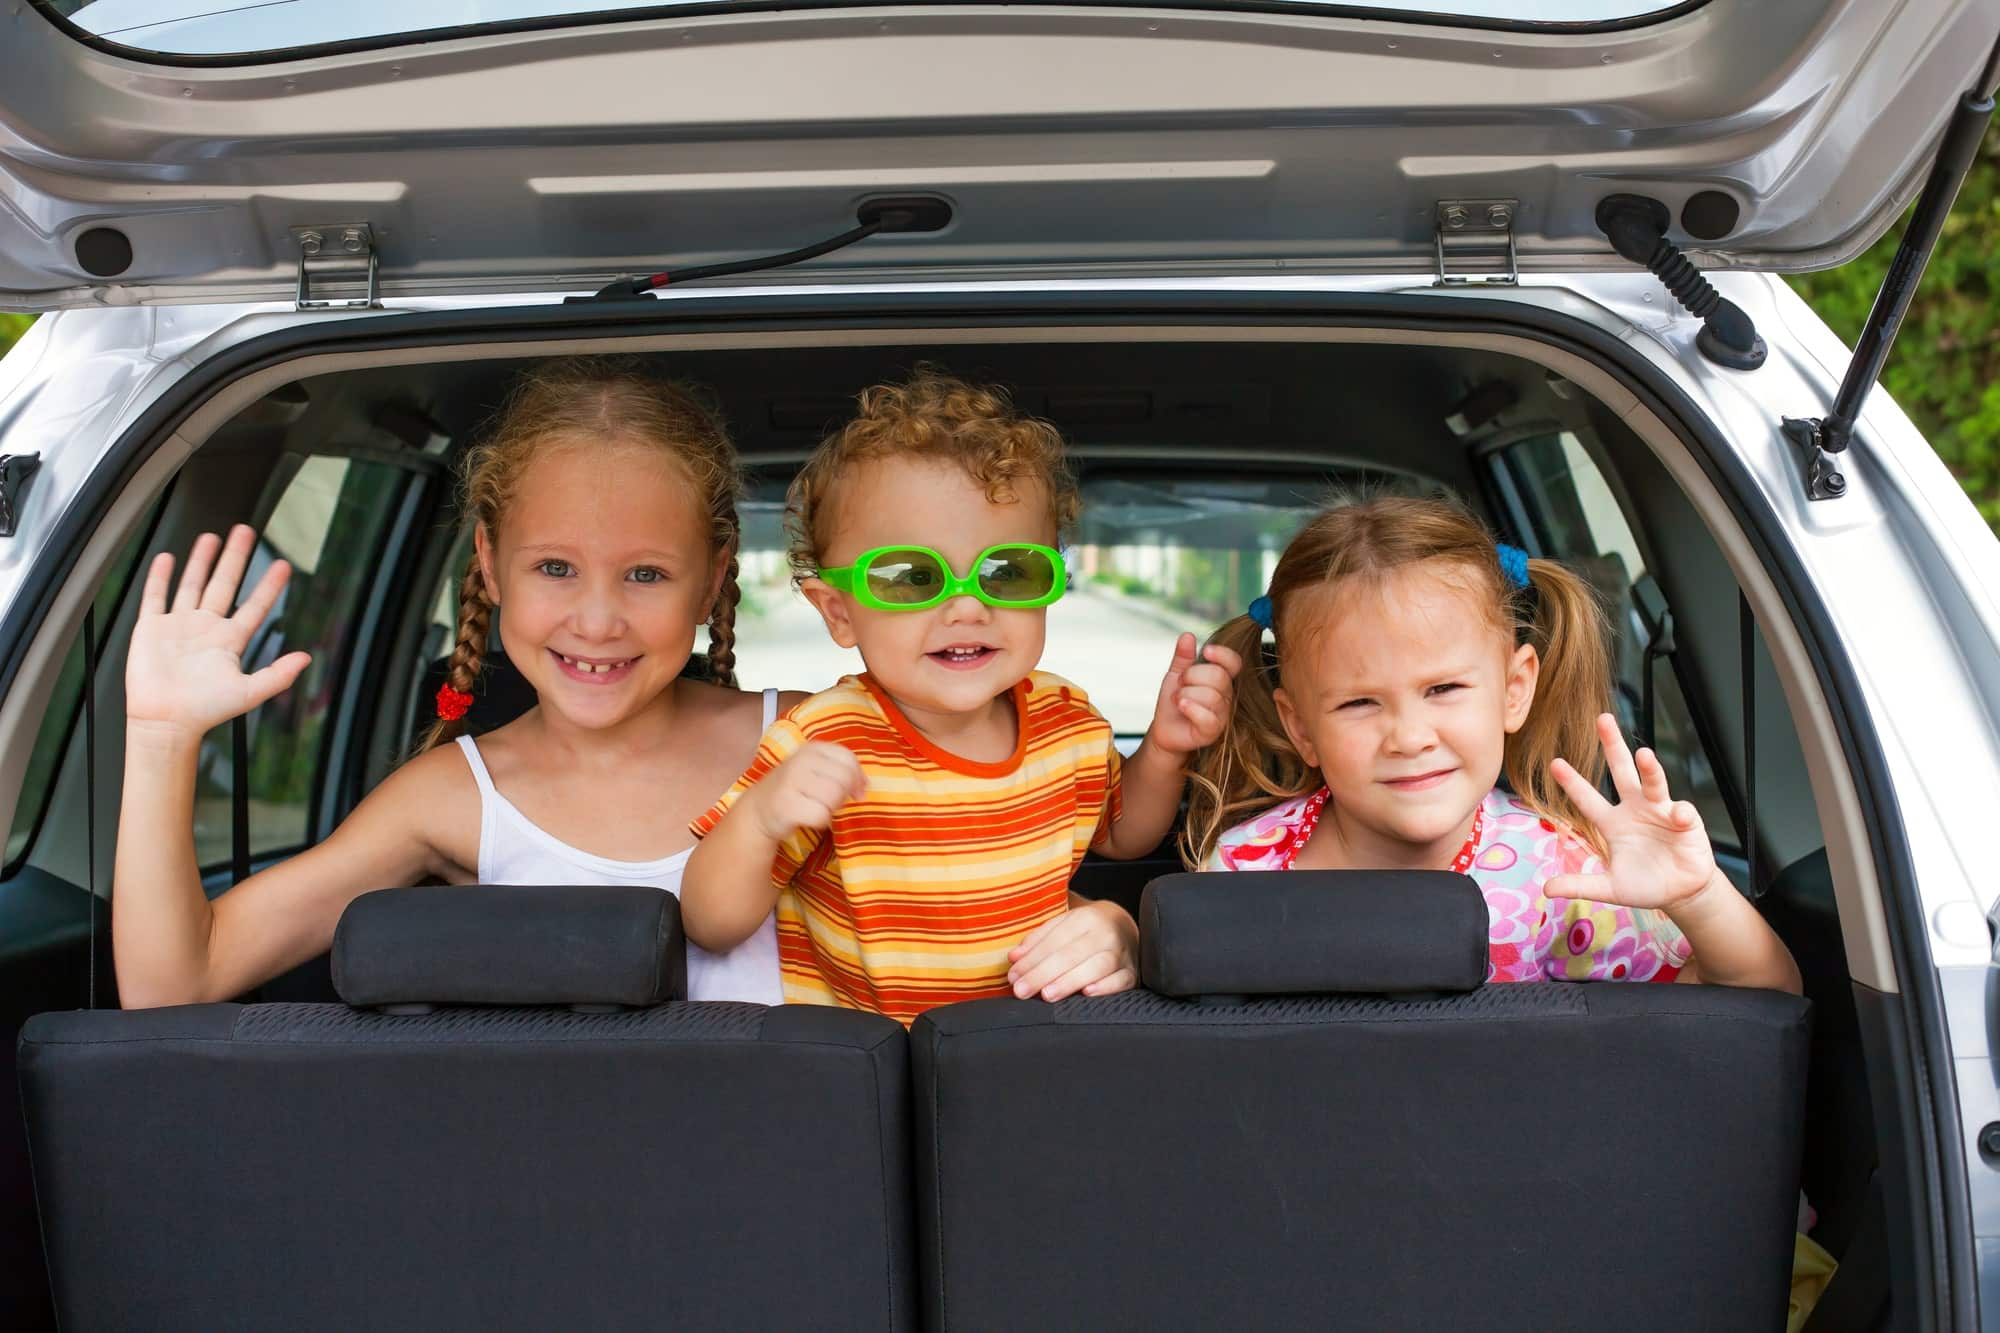 Three kids looking at the back of a car